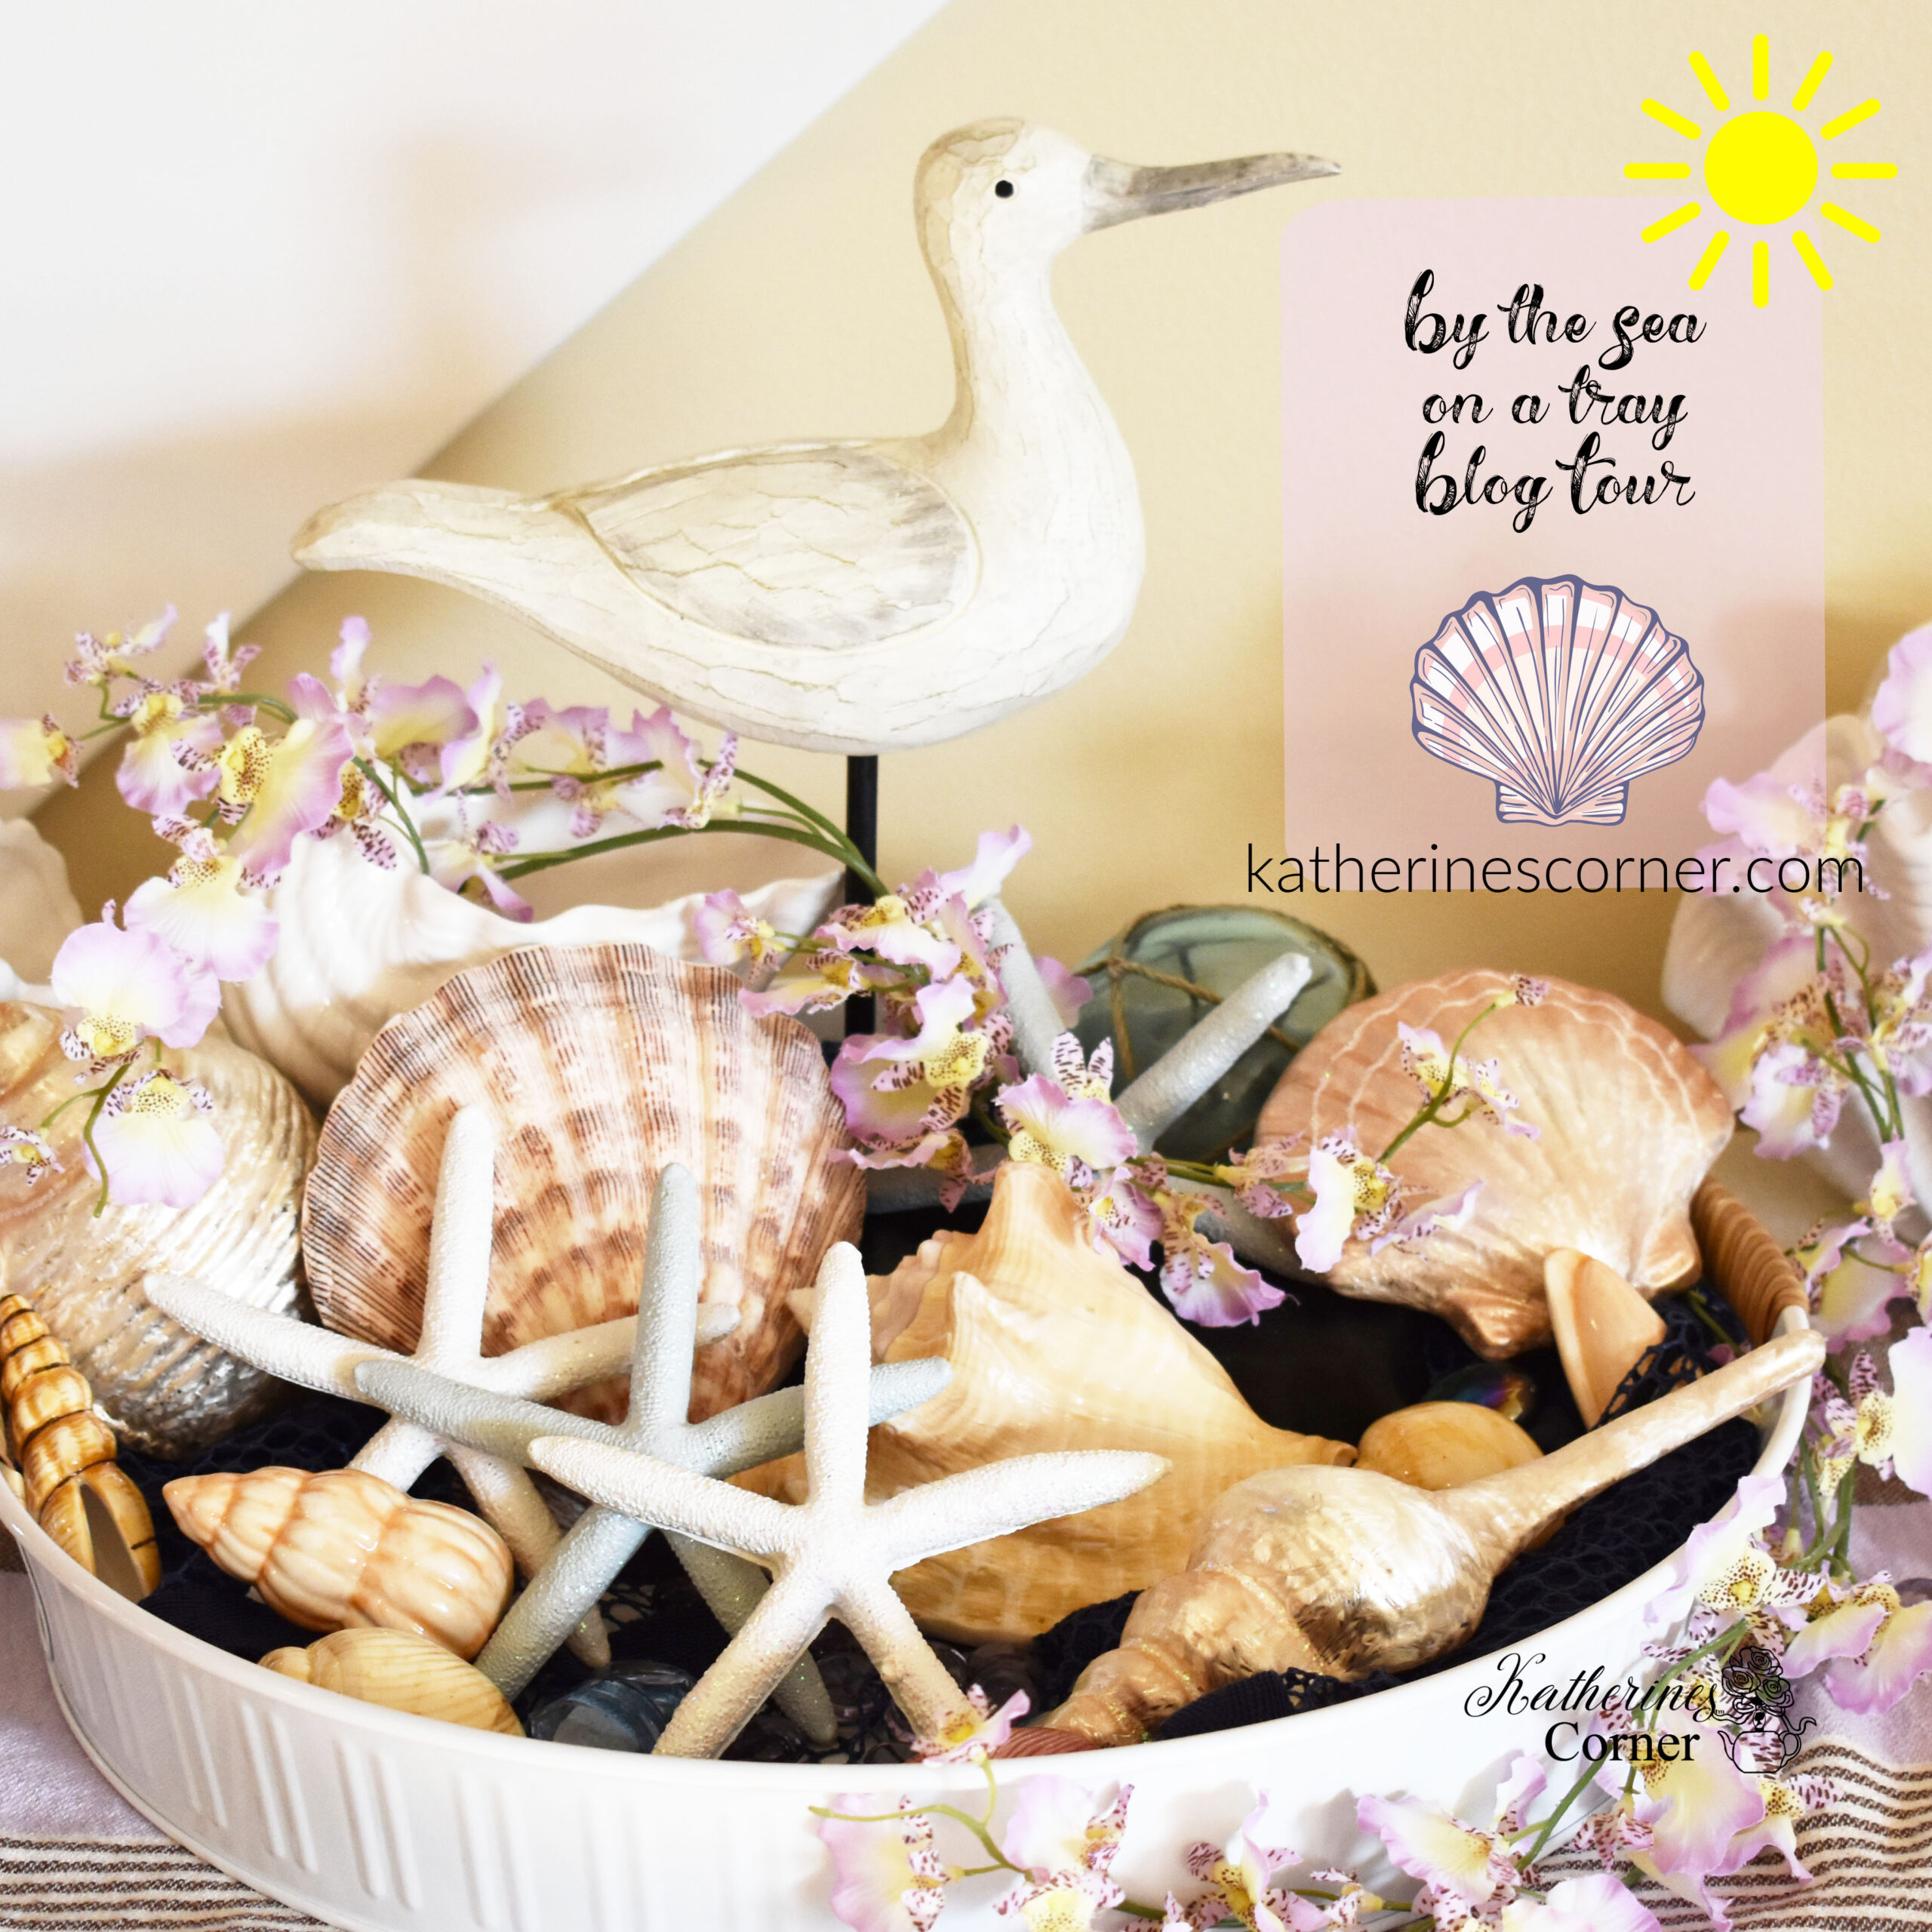 She Sells Seashells and By the Sea On a Tray Blog Tour